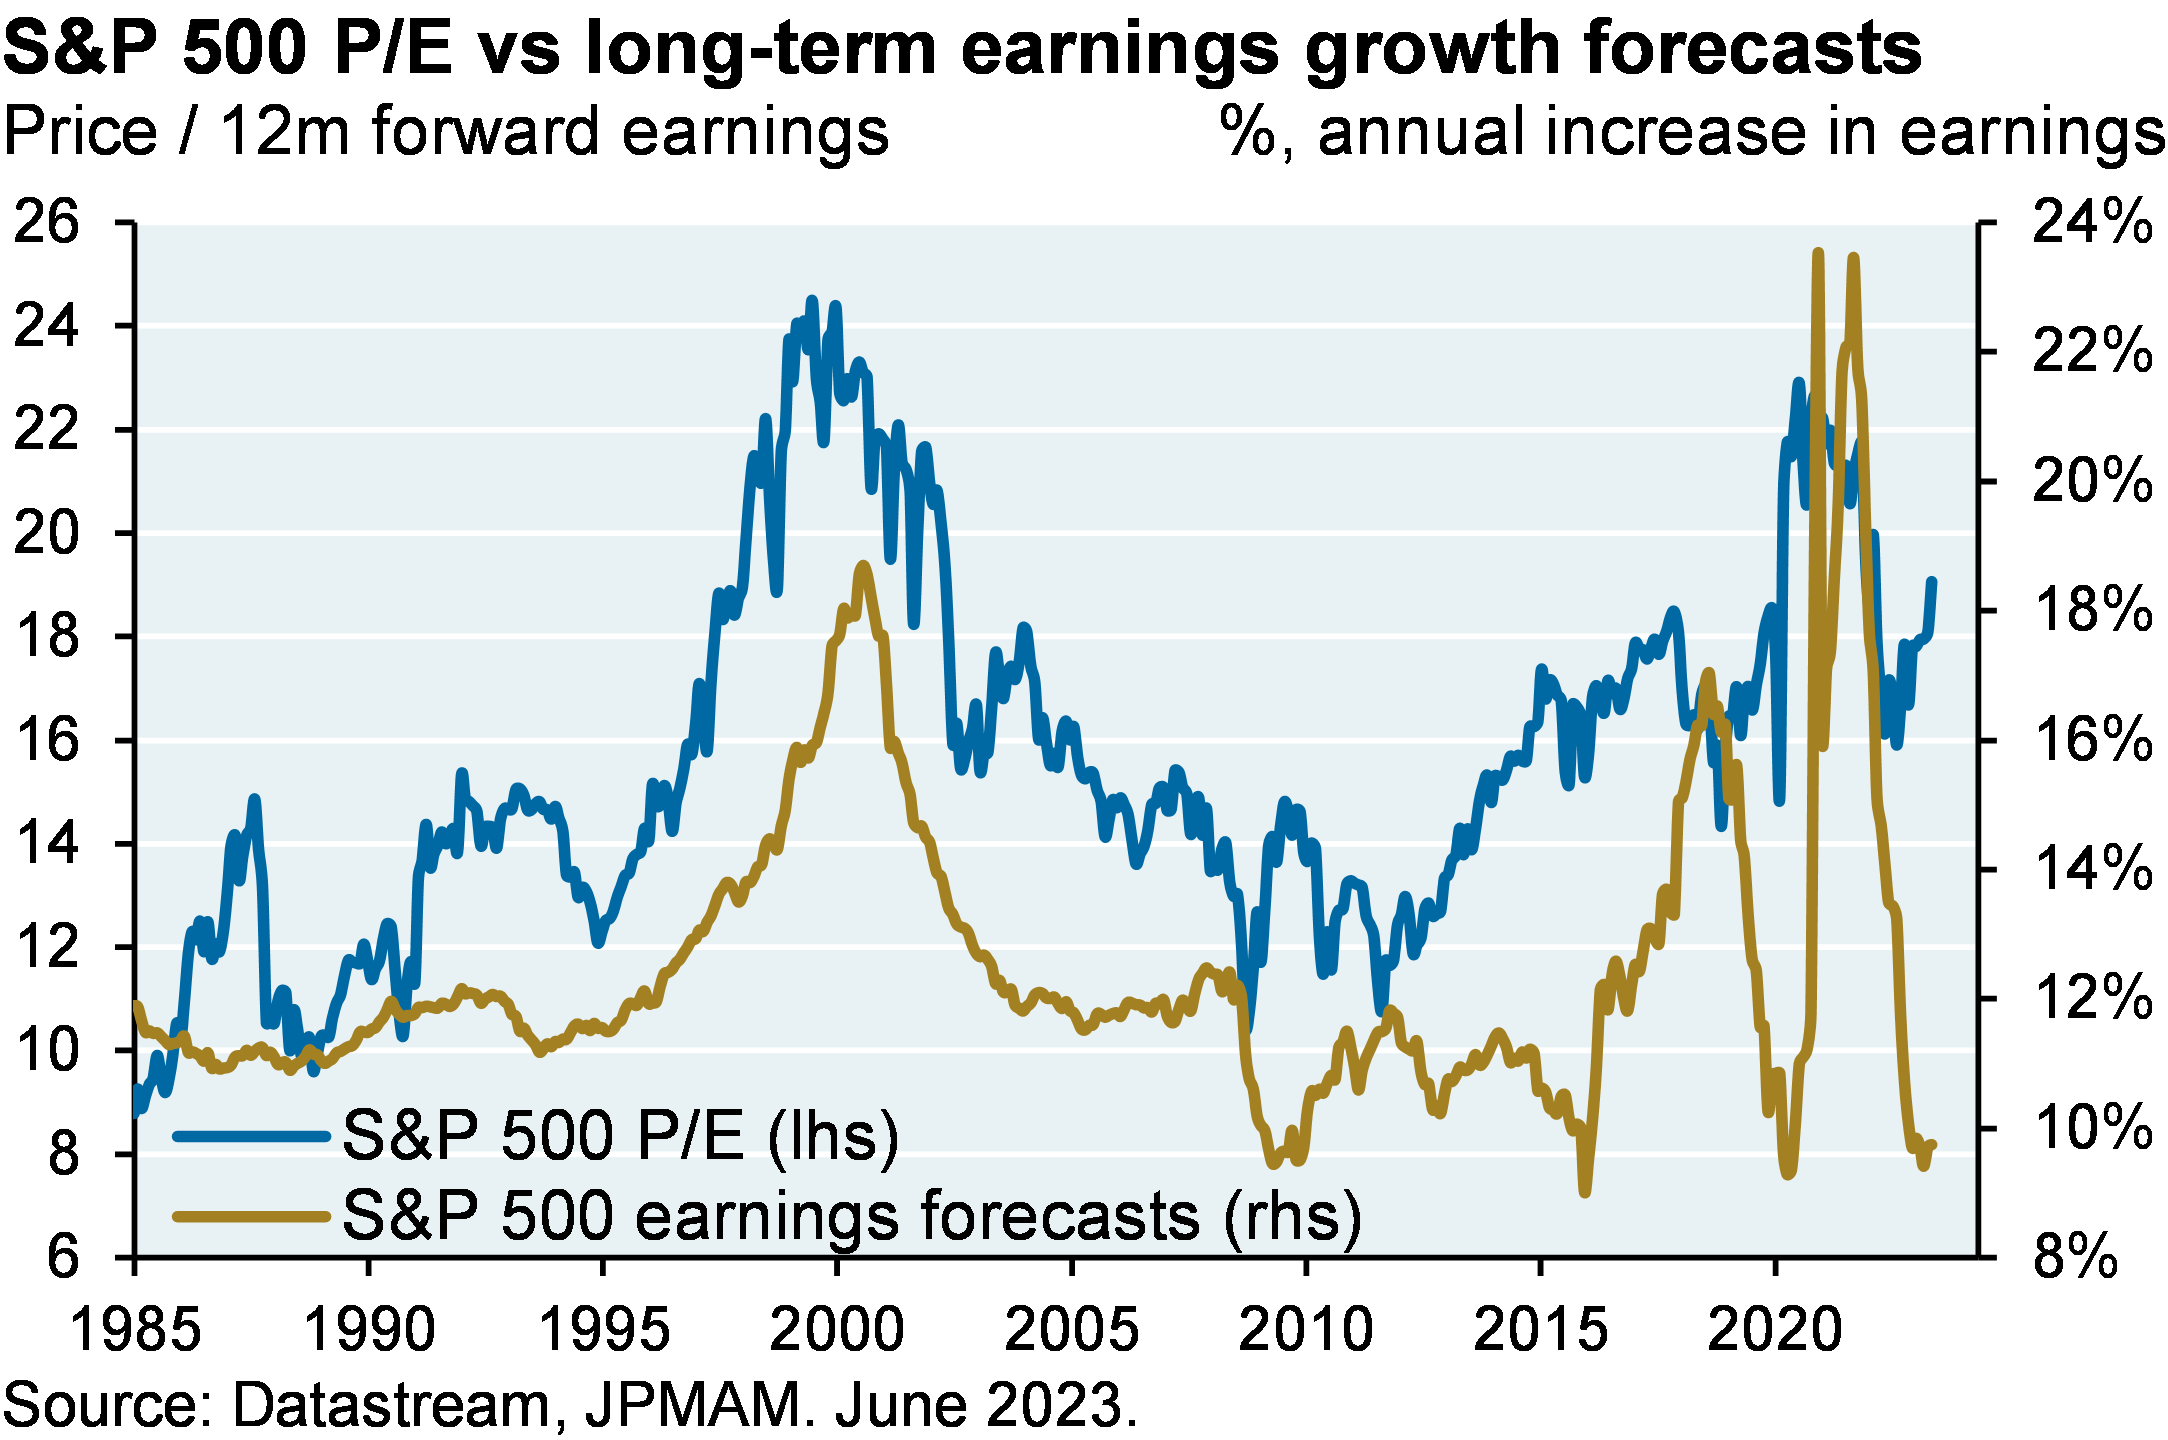 Line chart displays S&P 500 Price / 12m forward earnings and S&P 500 earnings forecasts from 1985 to the present. P/E ratios have risen this year while long-term earnings forecasts have dropped; rising valuations account for most of the gain in the S&P 500.